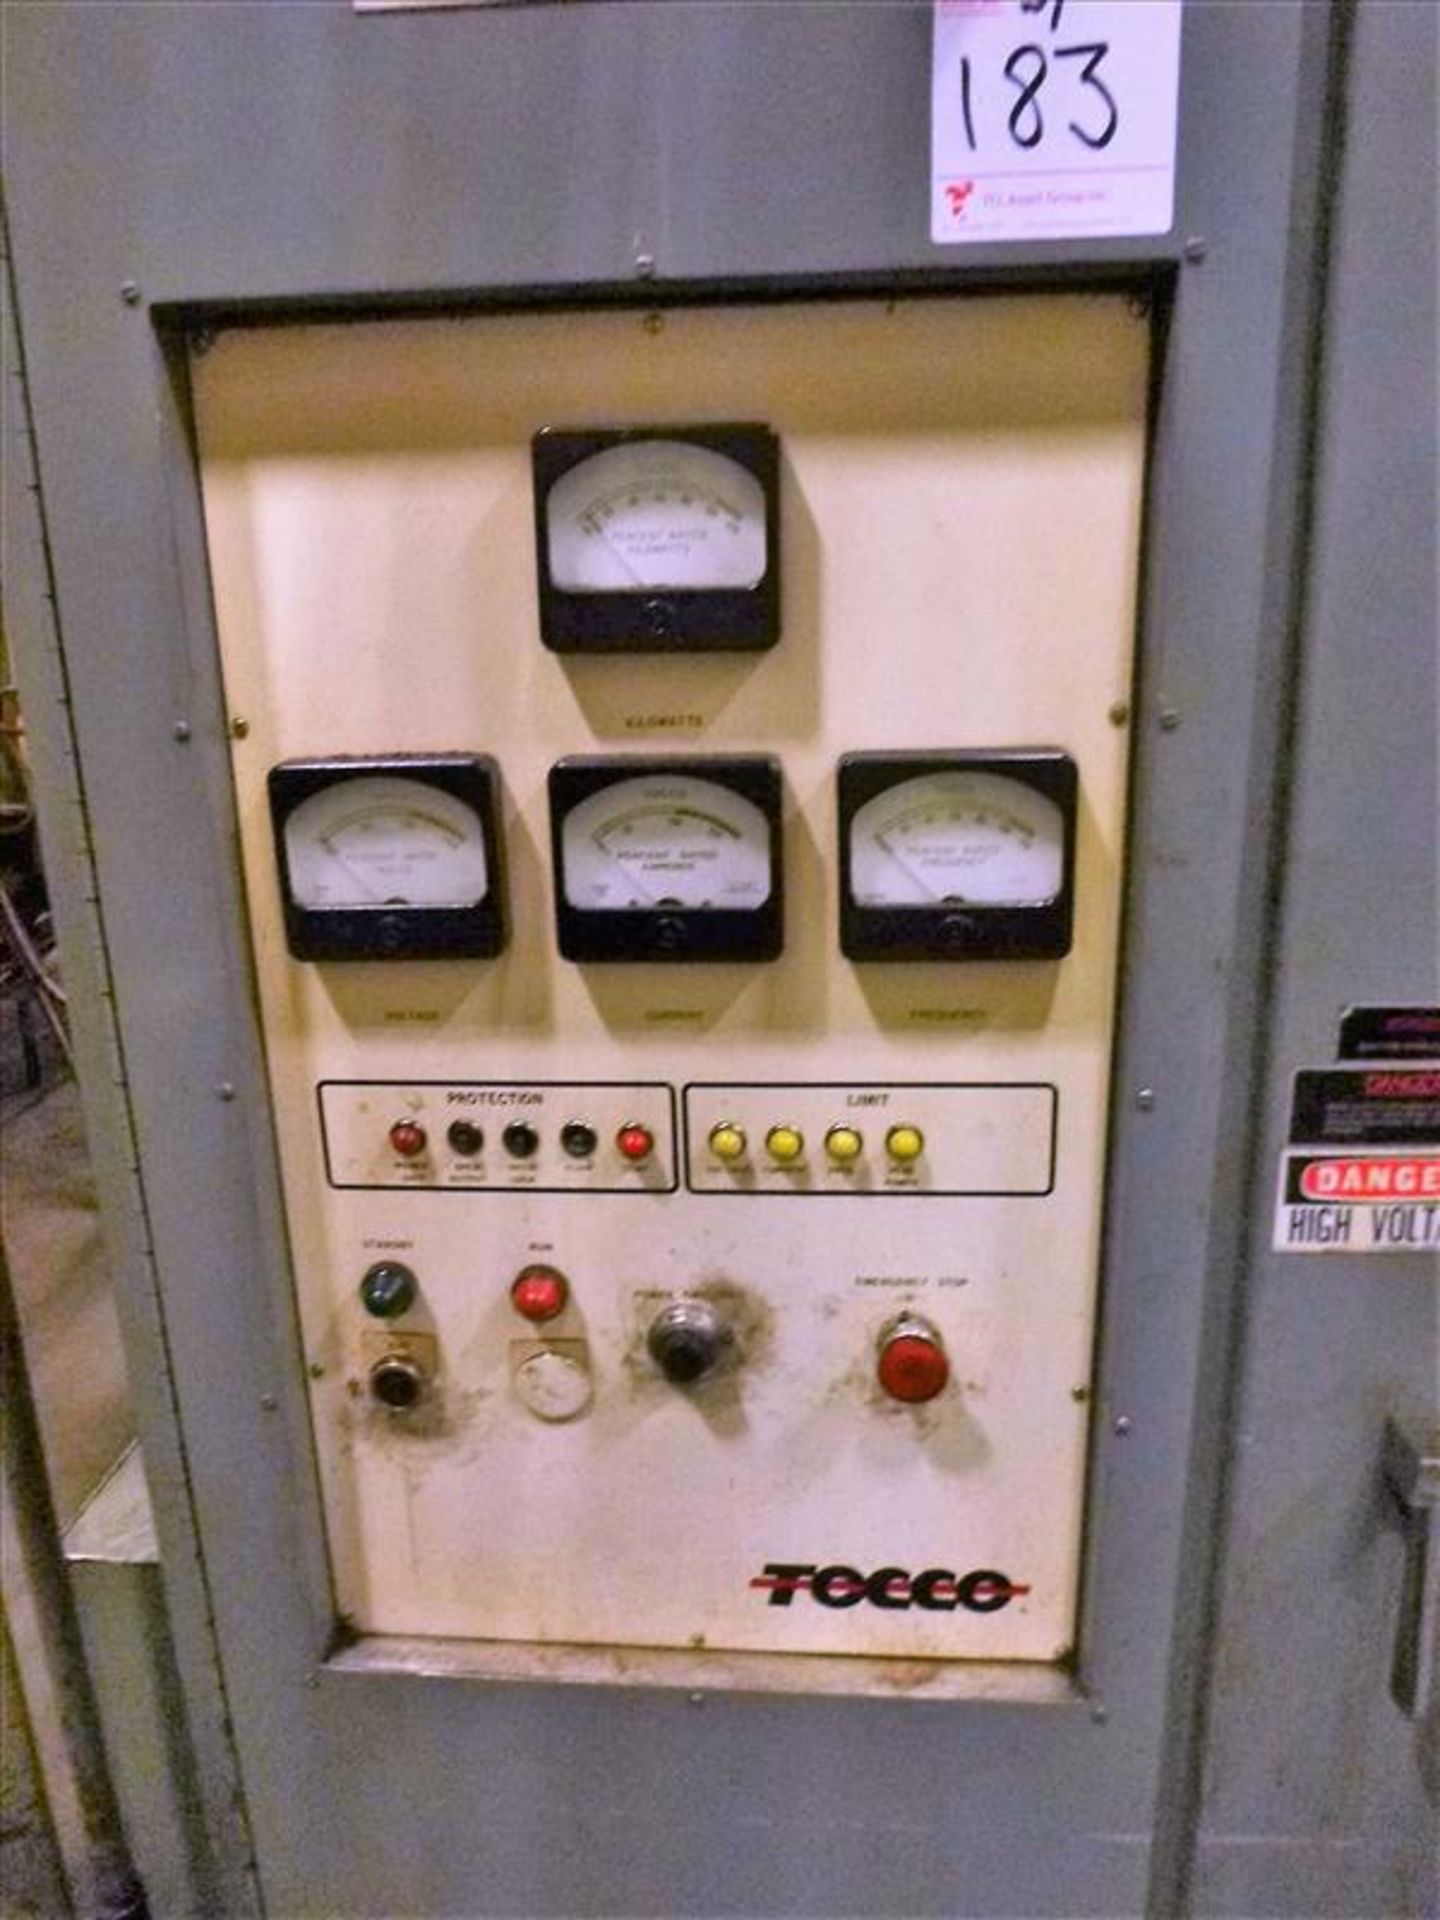 TOCCO Hardener Unit w/ TOCCOTRON 5EA 150 kw RF Generator, s/n 12-8313-16 c/w Distilled Water, - Image 13 of 23